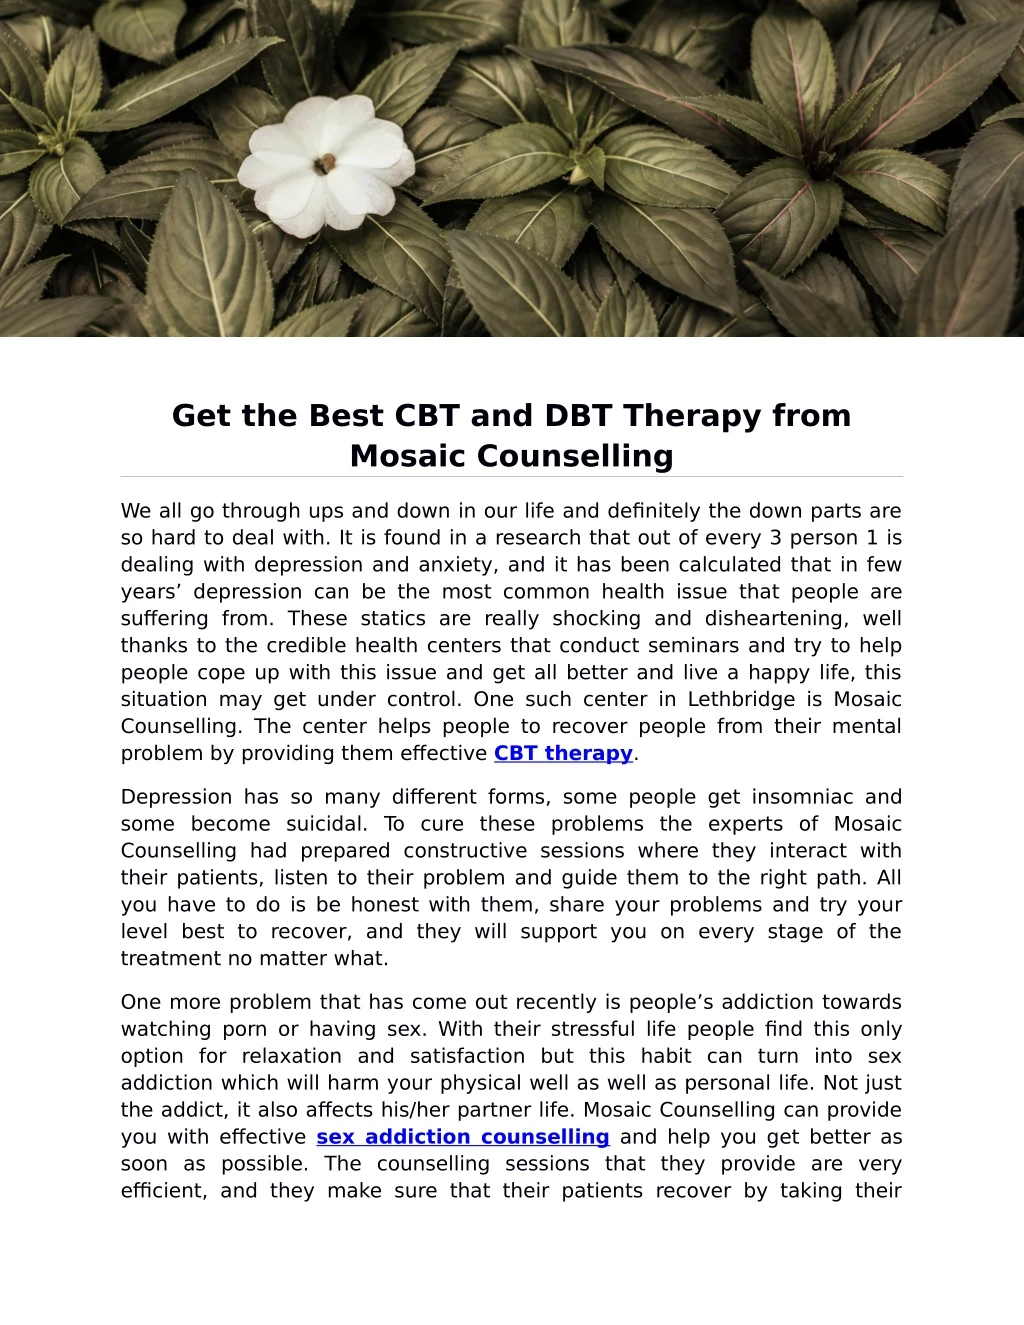 get the best cbt and dbt therapy from mosaic